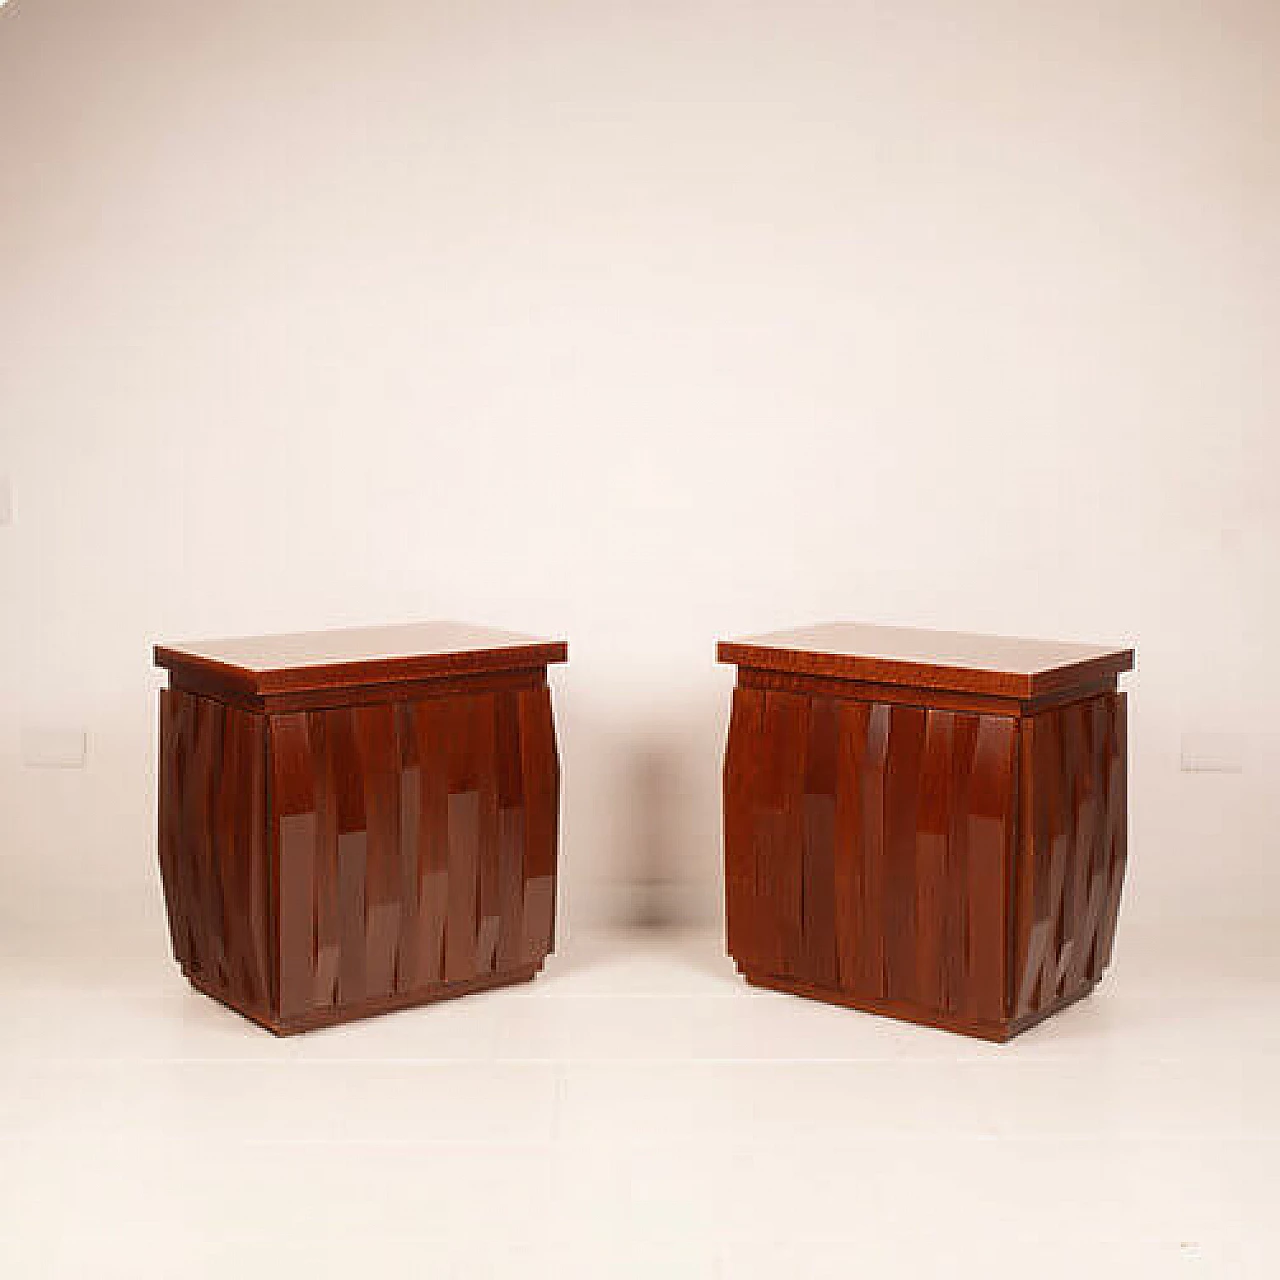 Pair of Barium solid walnut bedside tables by Luciano Frigerio for Frigerio di Desio, 1970s 3